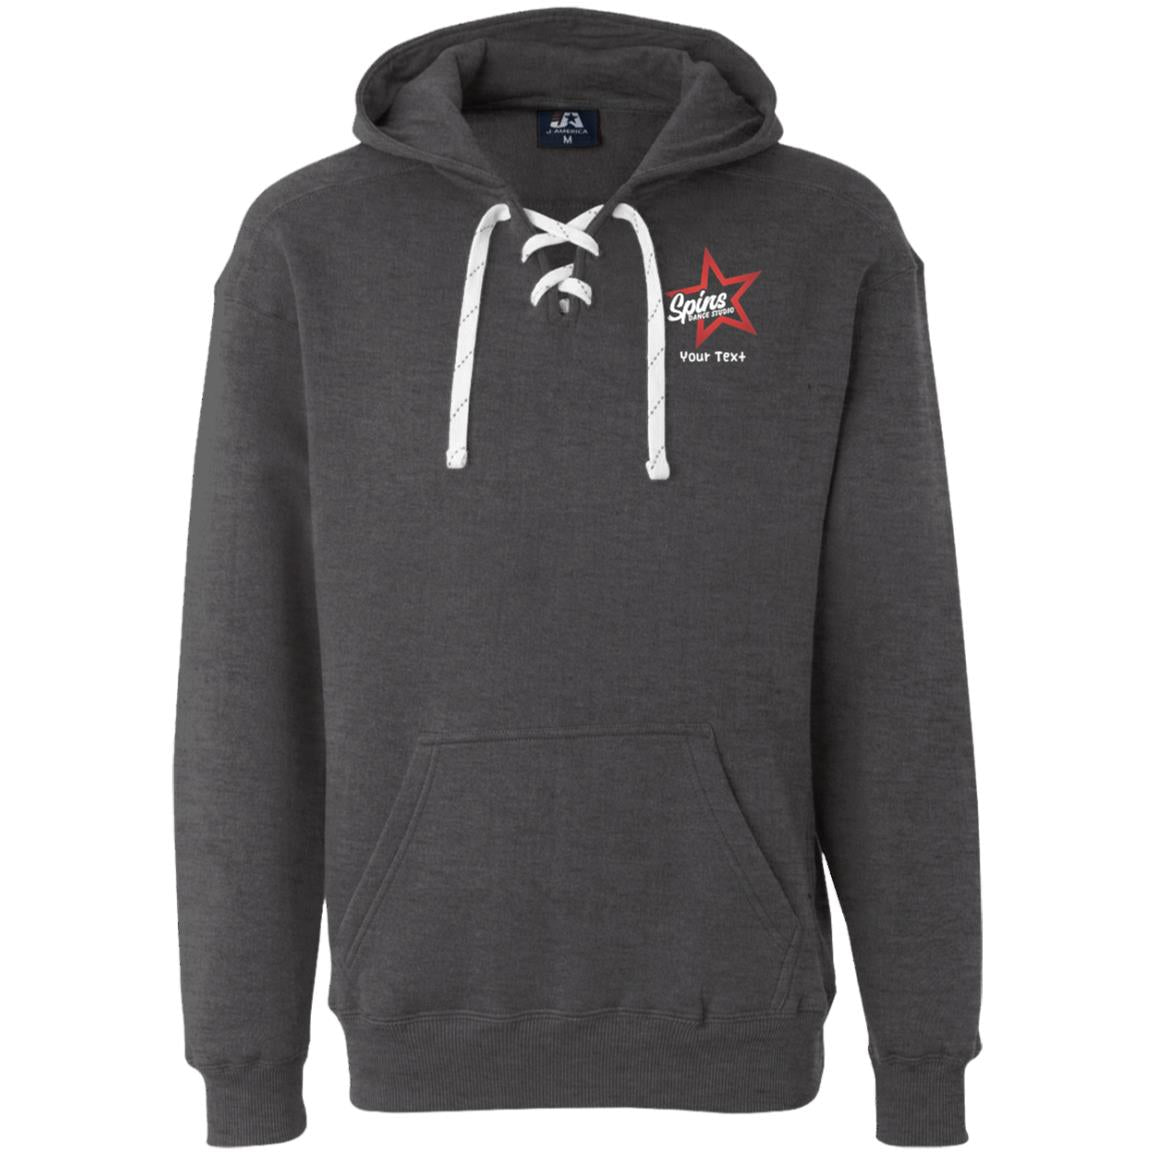 Spins Heavyweight Sport Lace Hoodie - With Personalization